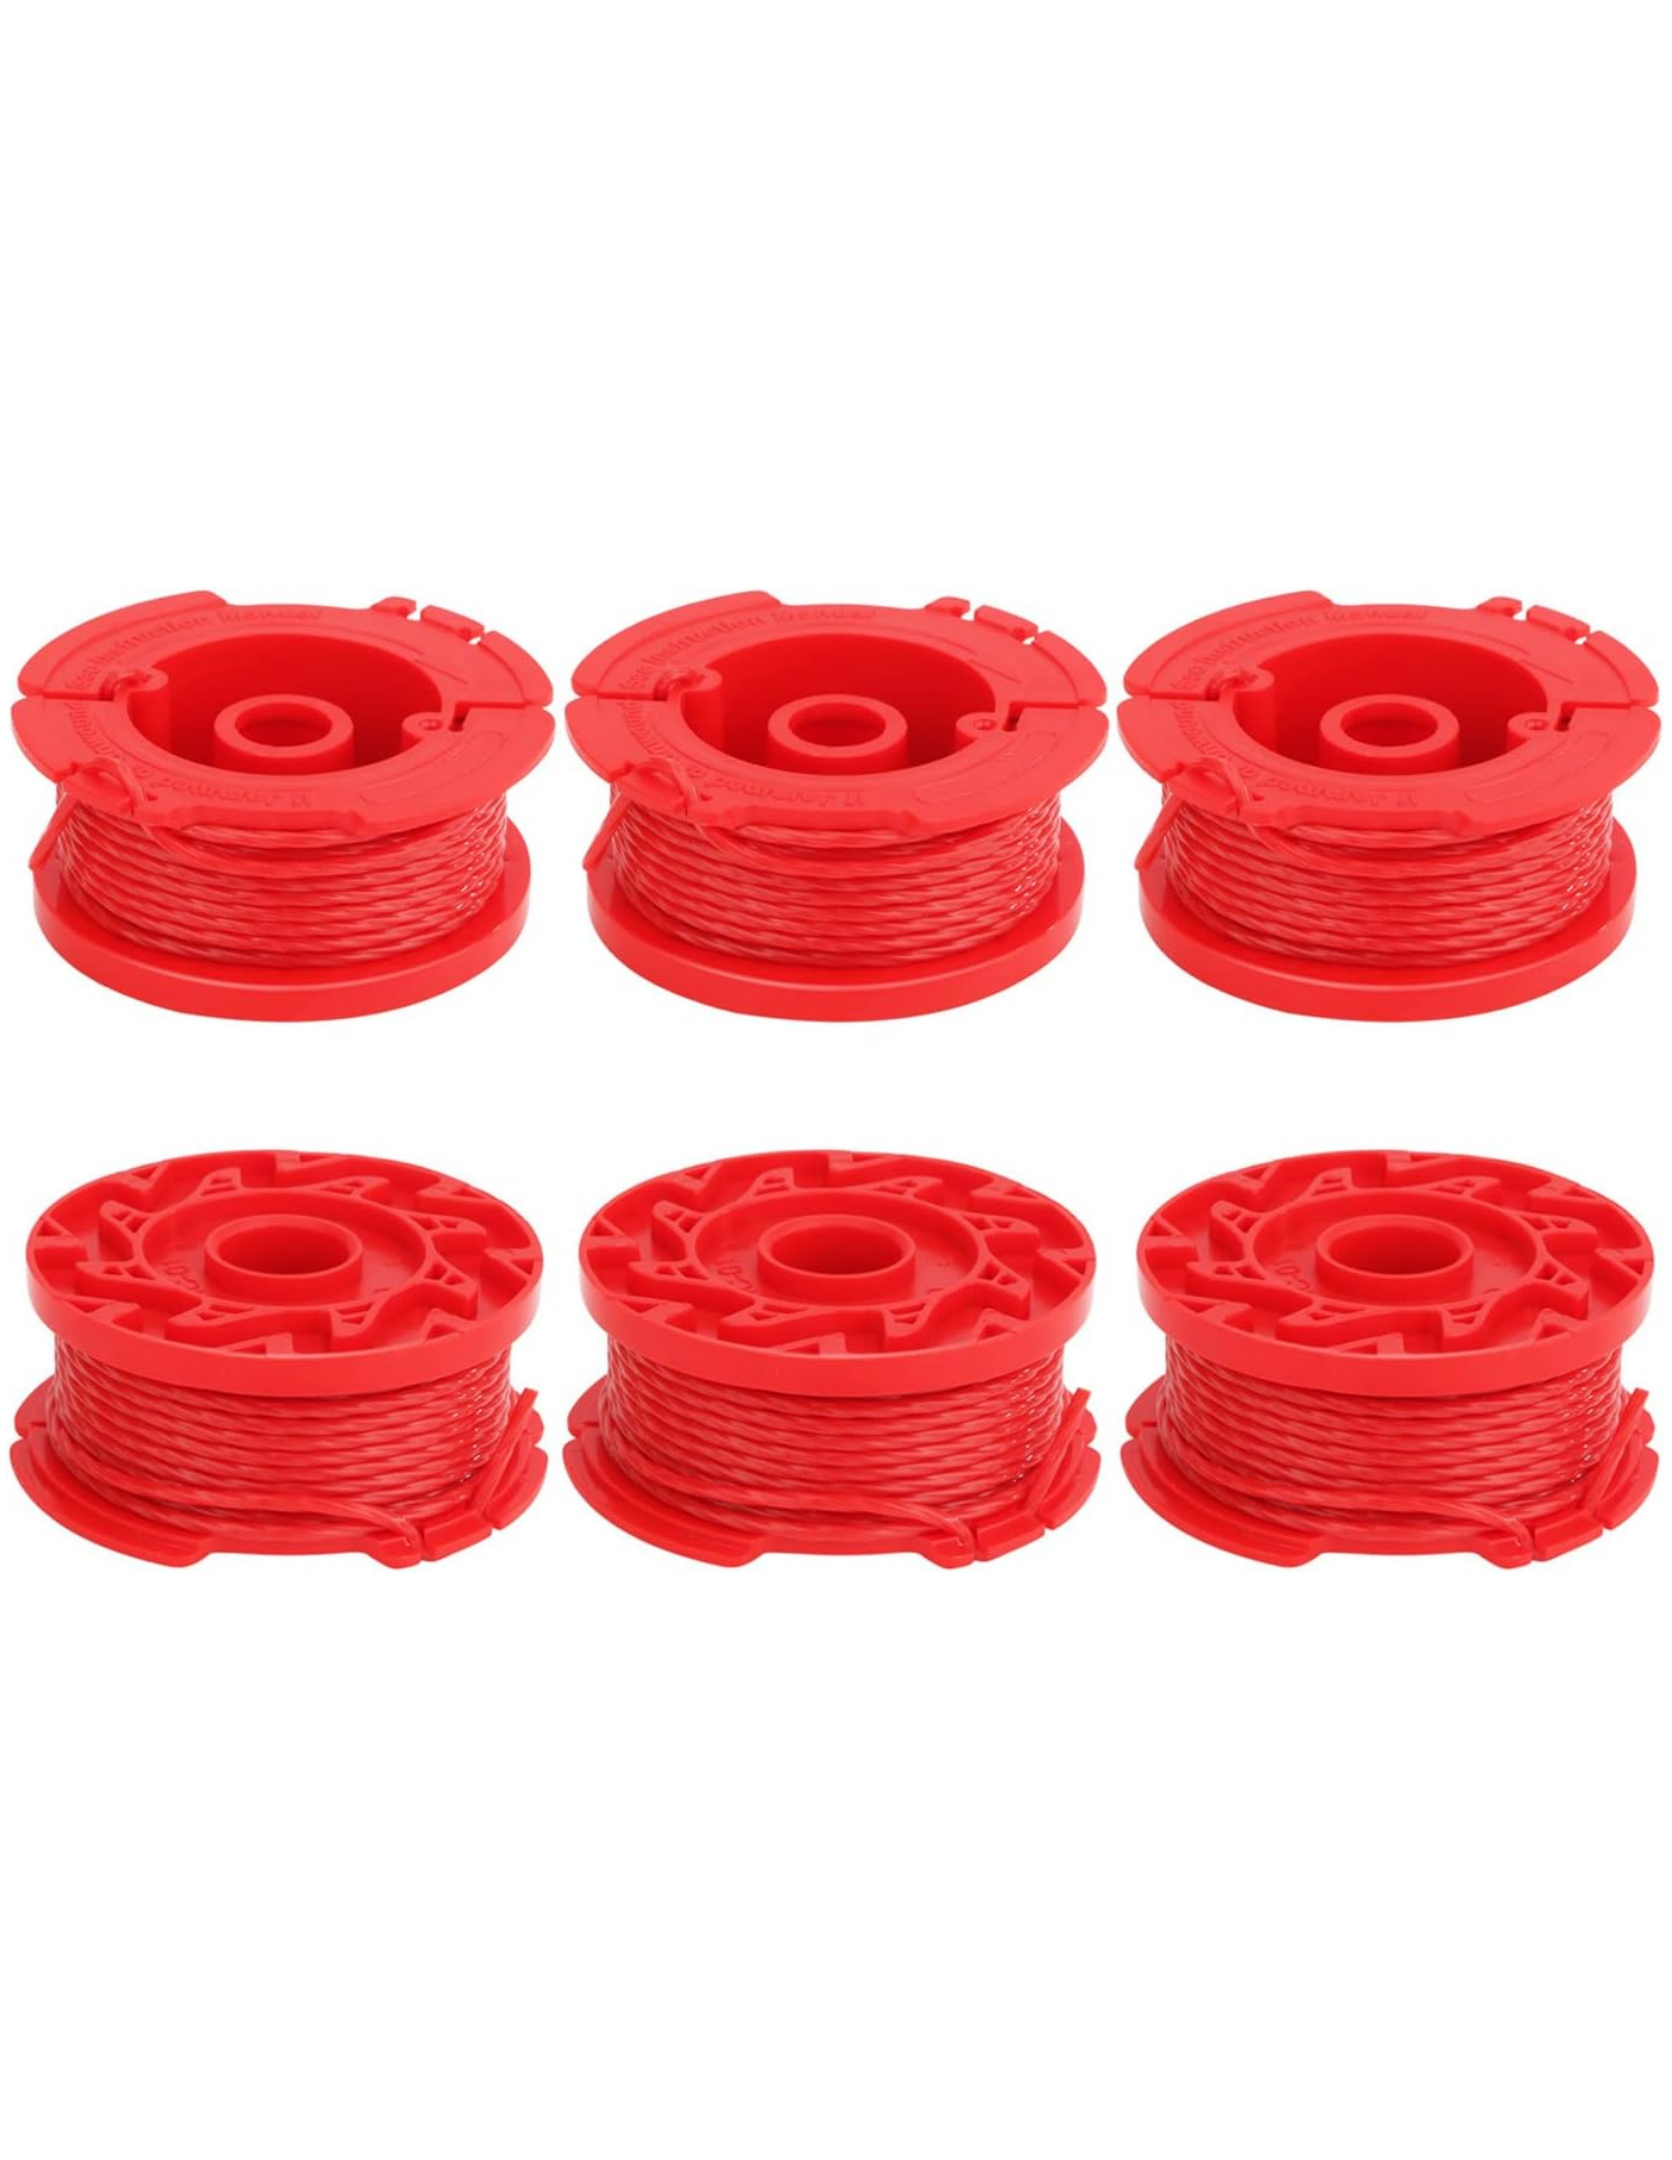 THTEN CMZST0803 CMZST080 String Trimmer Spool Line 20Ft 0.080 Compatible with Craftsman CMCST910M,CMCST910M1 Series weedwacker String Trimmers 6 Pack